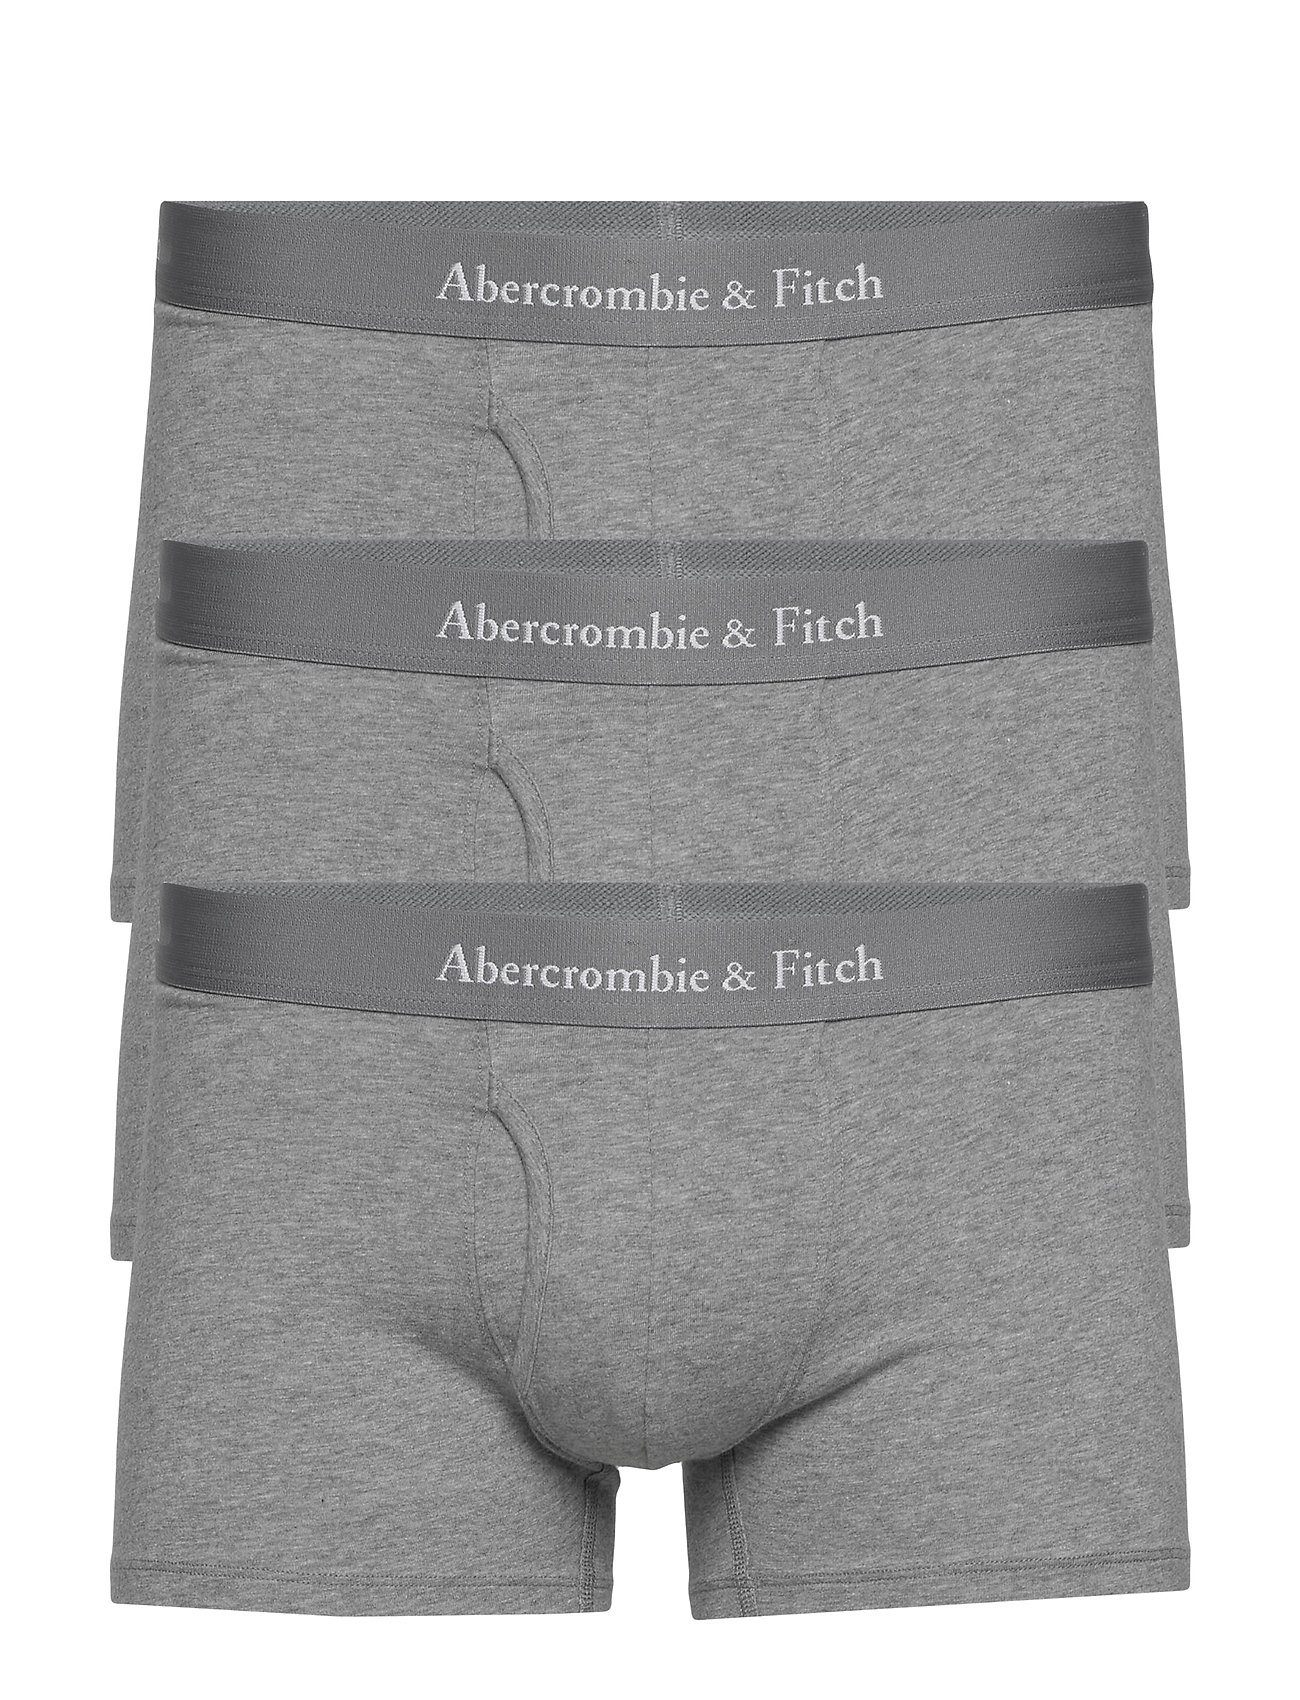 abercrombie and fitch multipacks